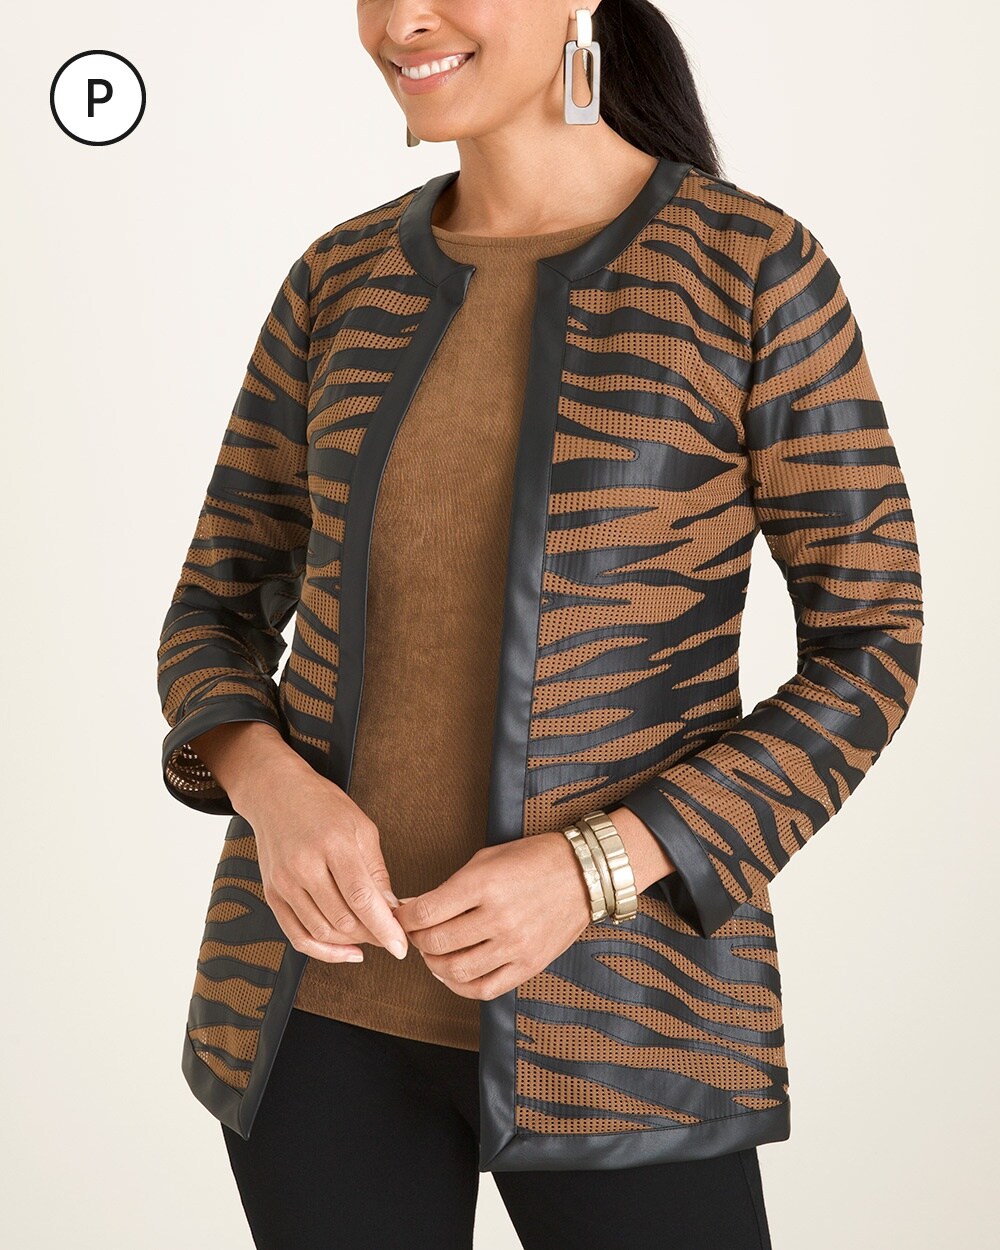 Travelers Collection Petite Striped Mesh Jacket